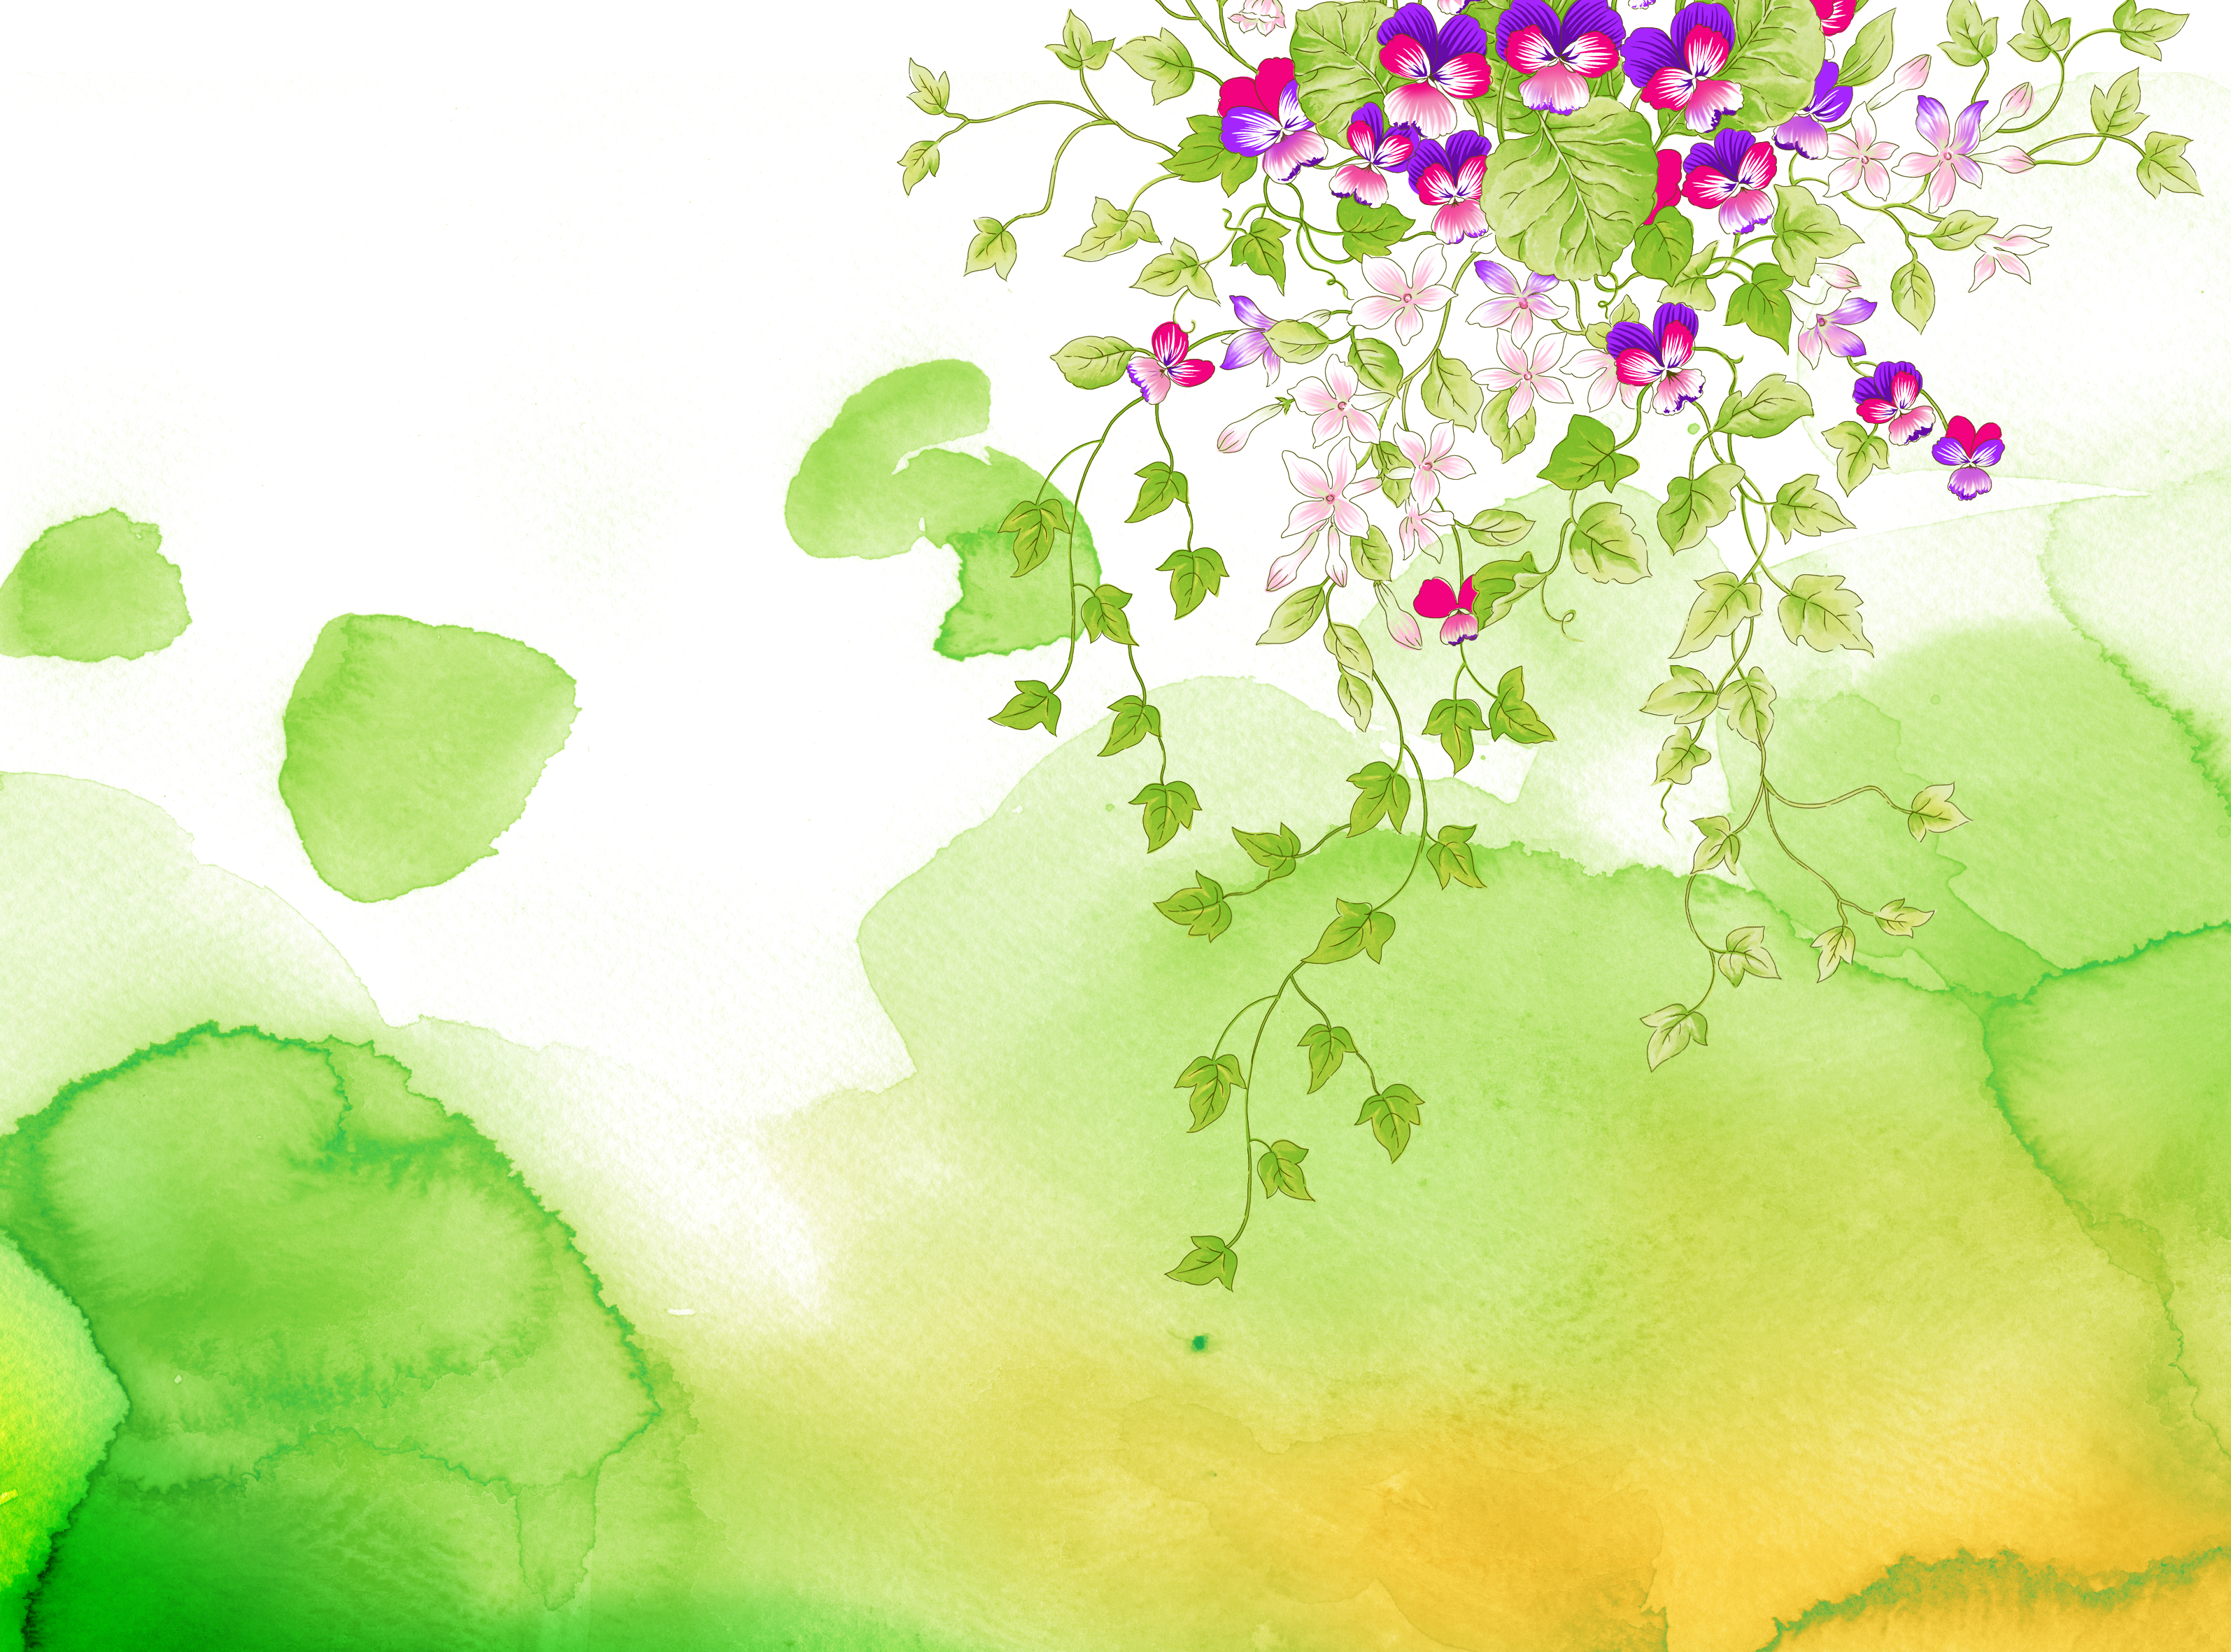 fully layered watercolor nature background PSD 3189x2362